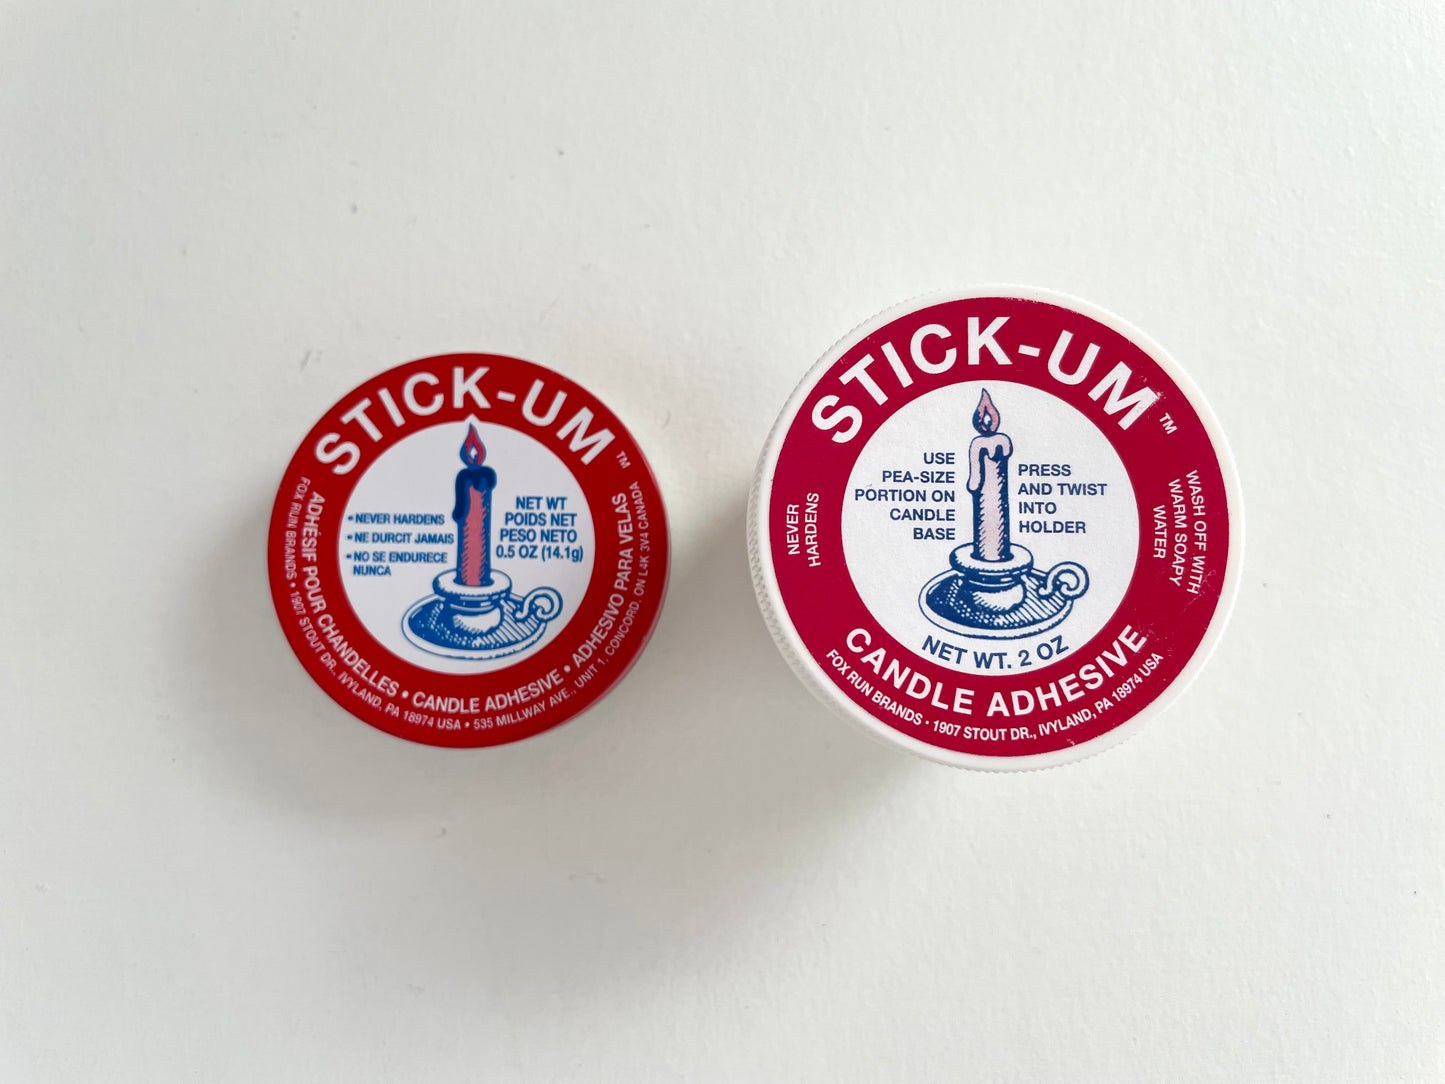 stick-um candle wax adhesive to keep tapers upright in the stand